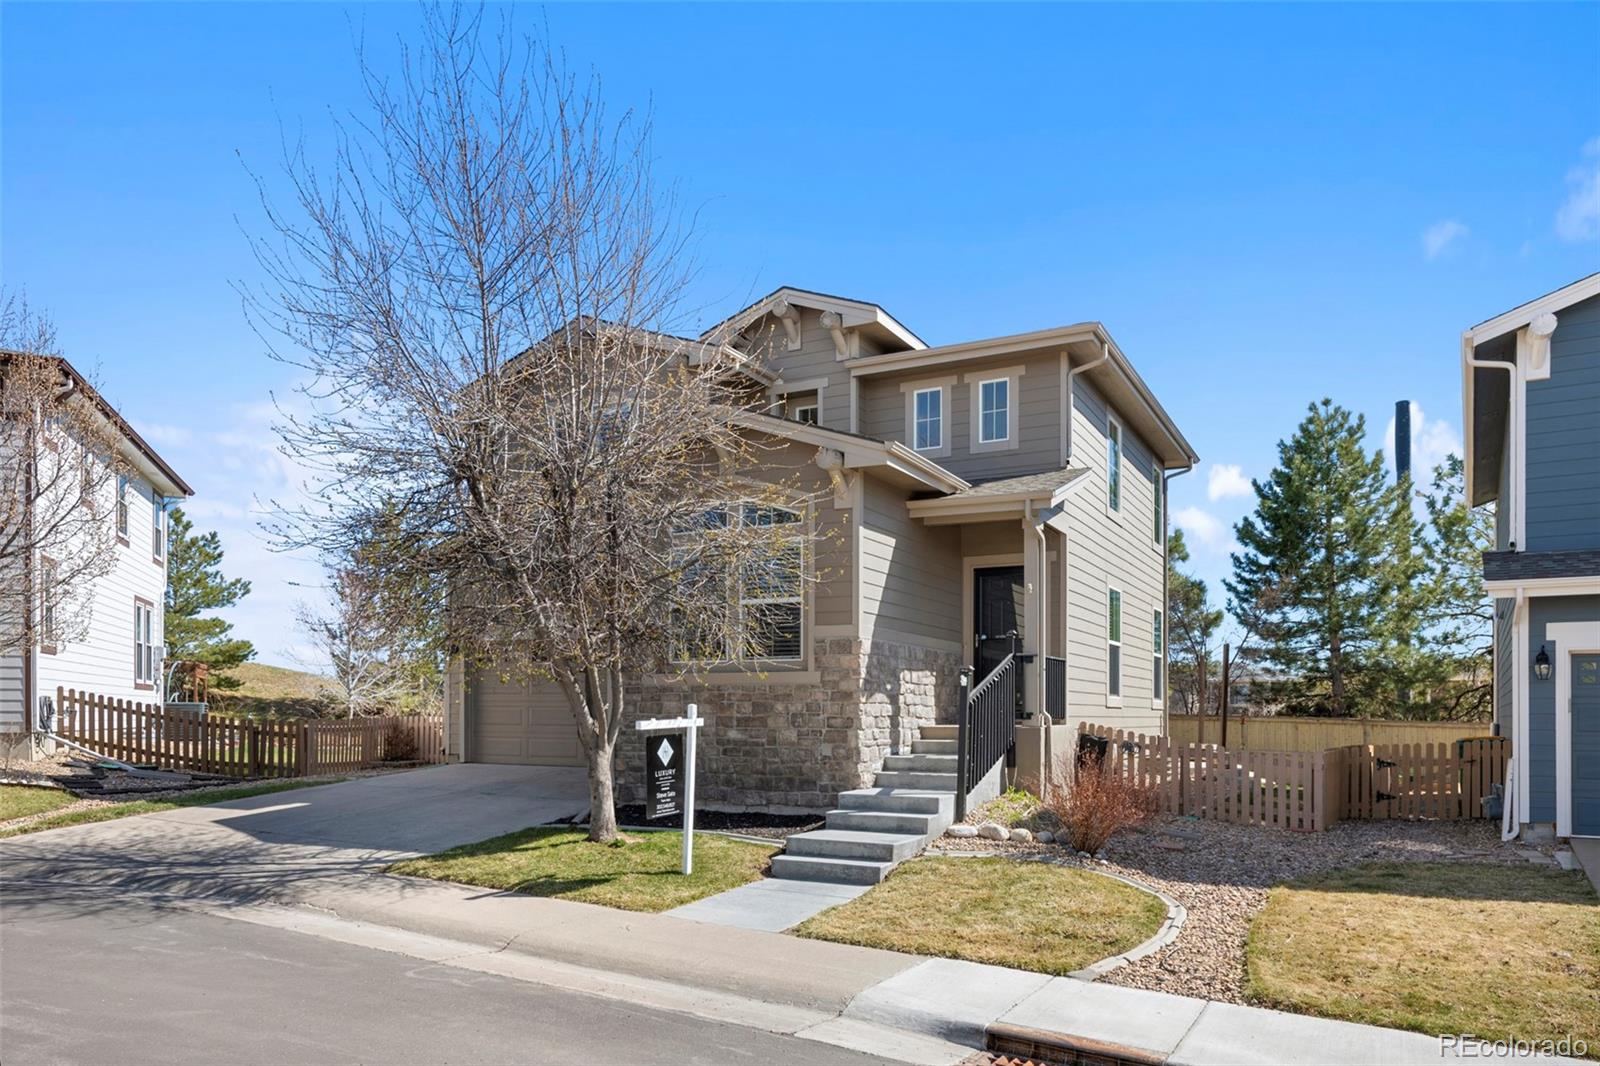 10660  jewelberry circle, Highlands Ranch sold home. Closed on 2024-05-20 for $686,000.